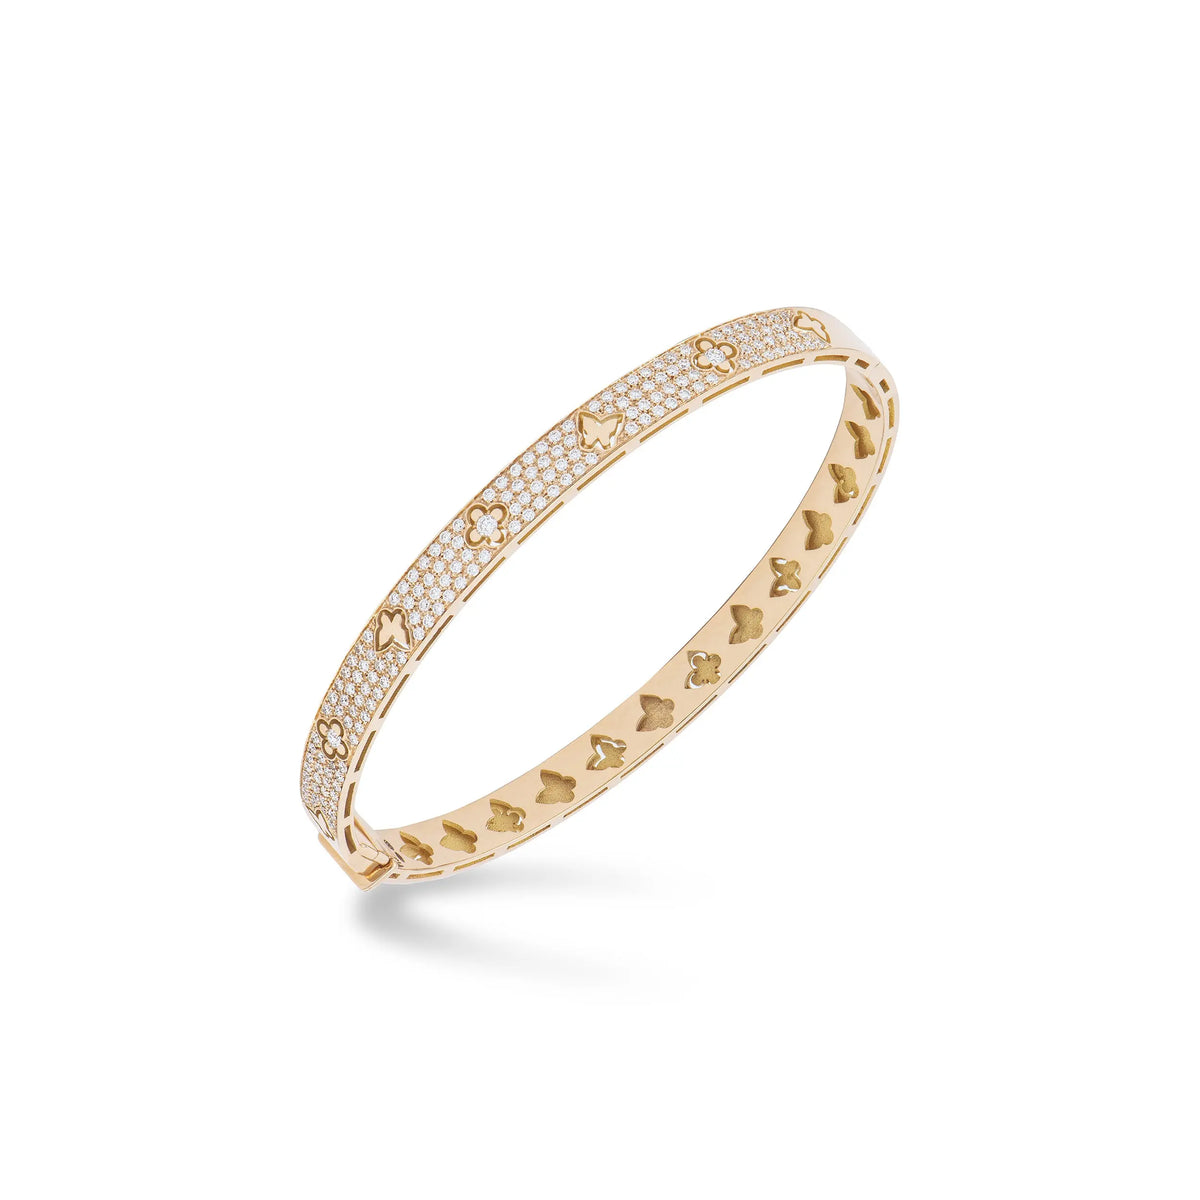 18k rose gold Pave Hinged Bangle .83 ct Butterfly Motif  The diamonds pavè highlights the iconic Piero Milano butterfly that alternates with a four-petaled flower  Designed by Piero Milano